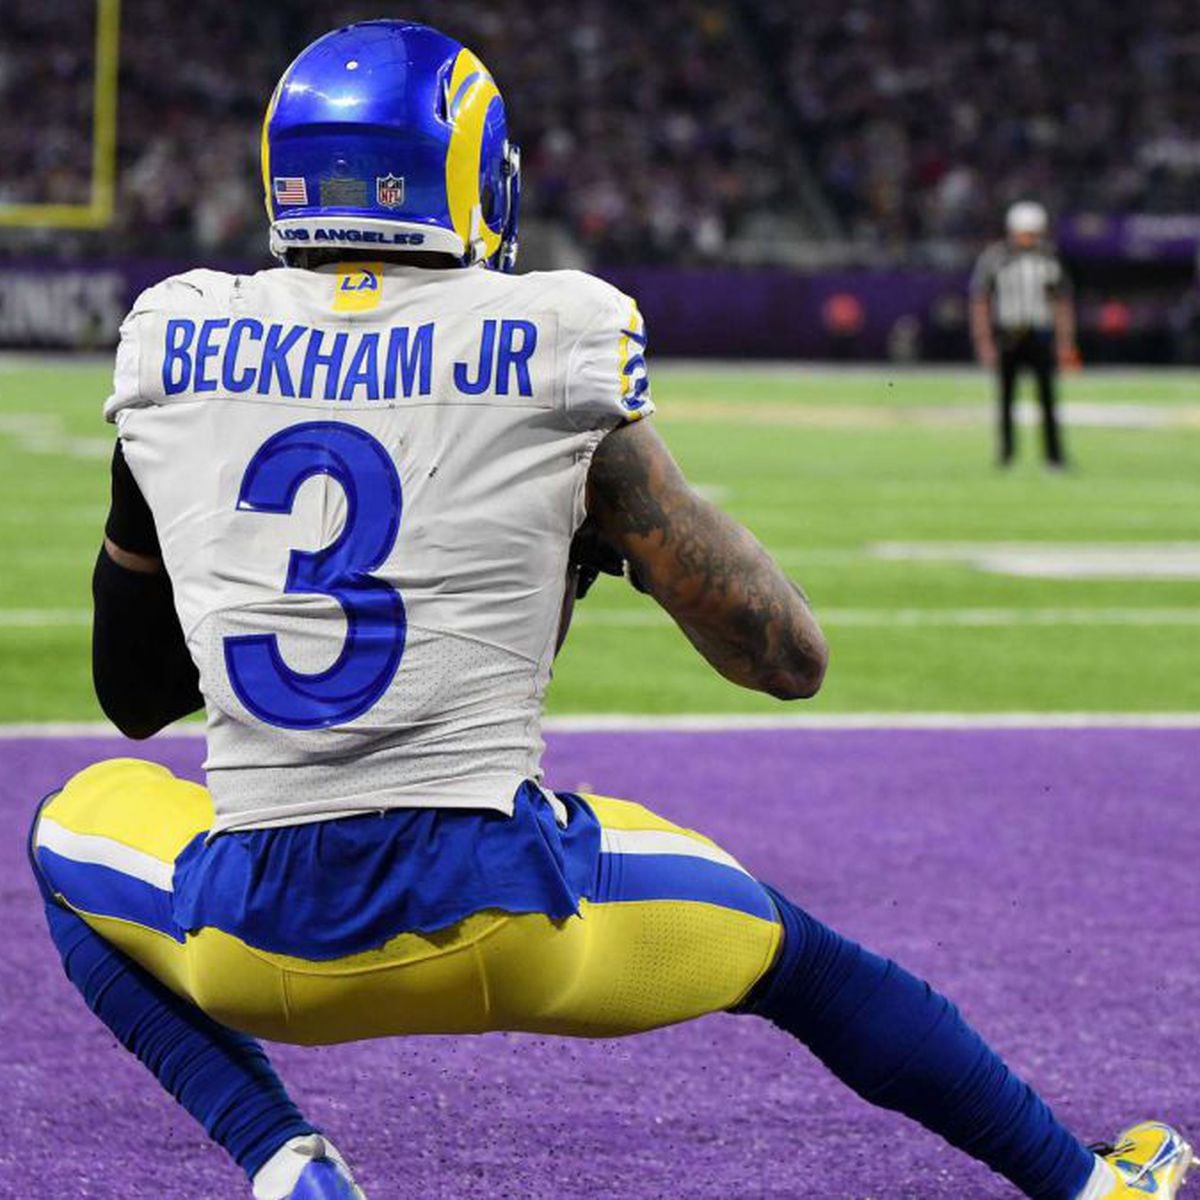 Odell Beckham Jr. Net Worth 2022: NFL Contract, Los Angeles Rams